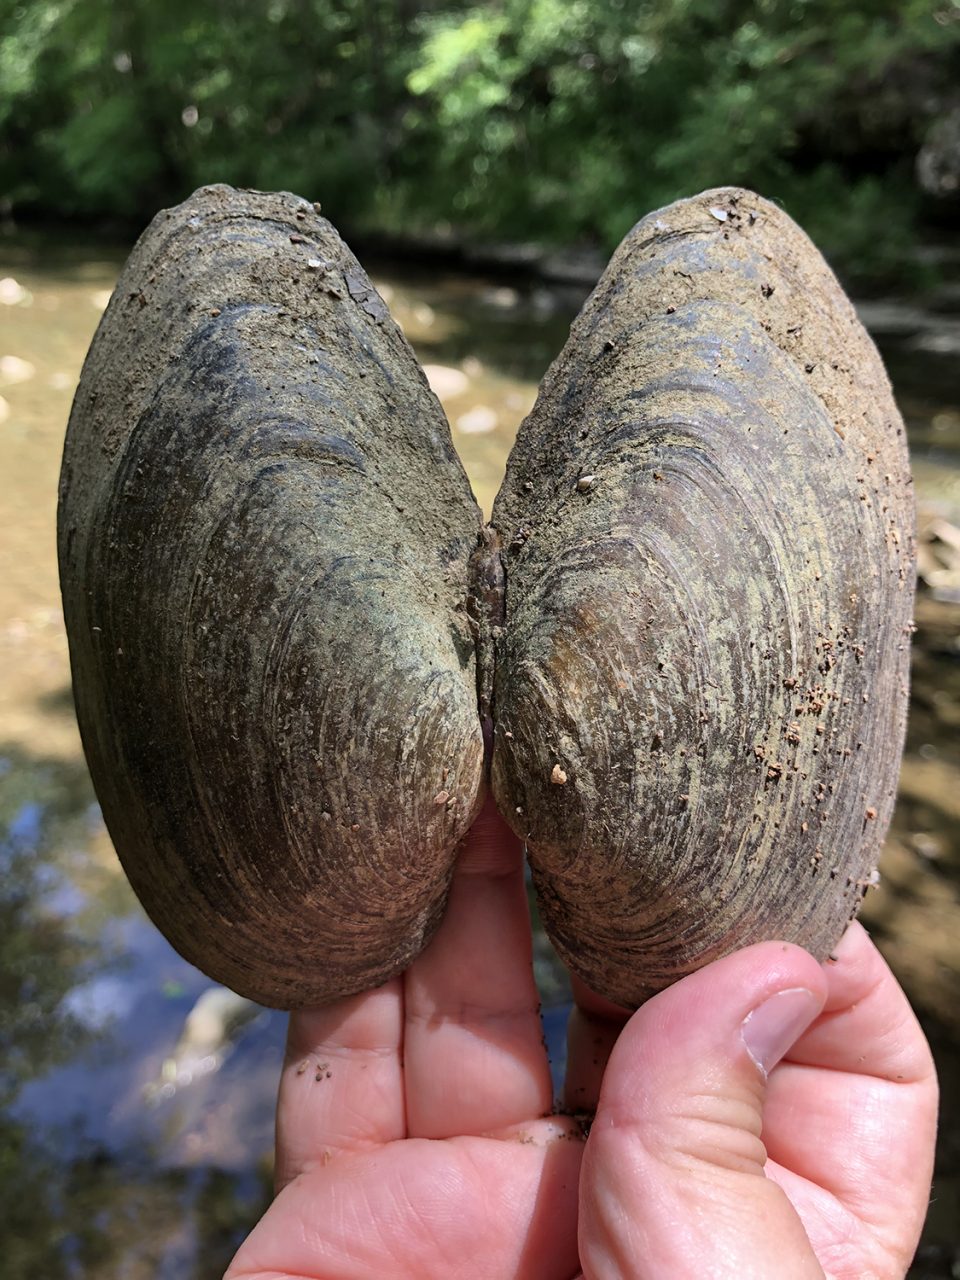 The river provides treats for local raccoons and for intrepid photographers, like this complete shell for a very large fresh-water clam I discovered on the riverbank.